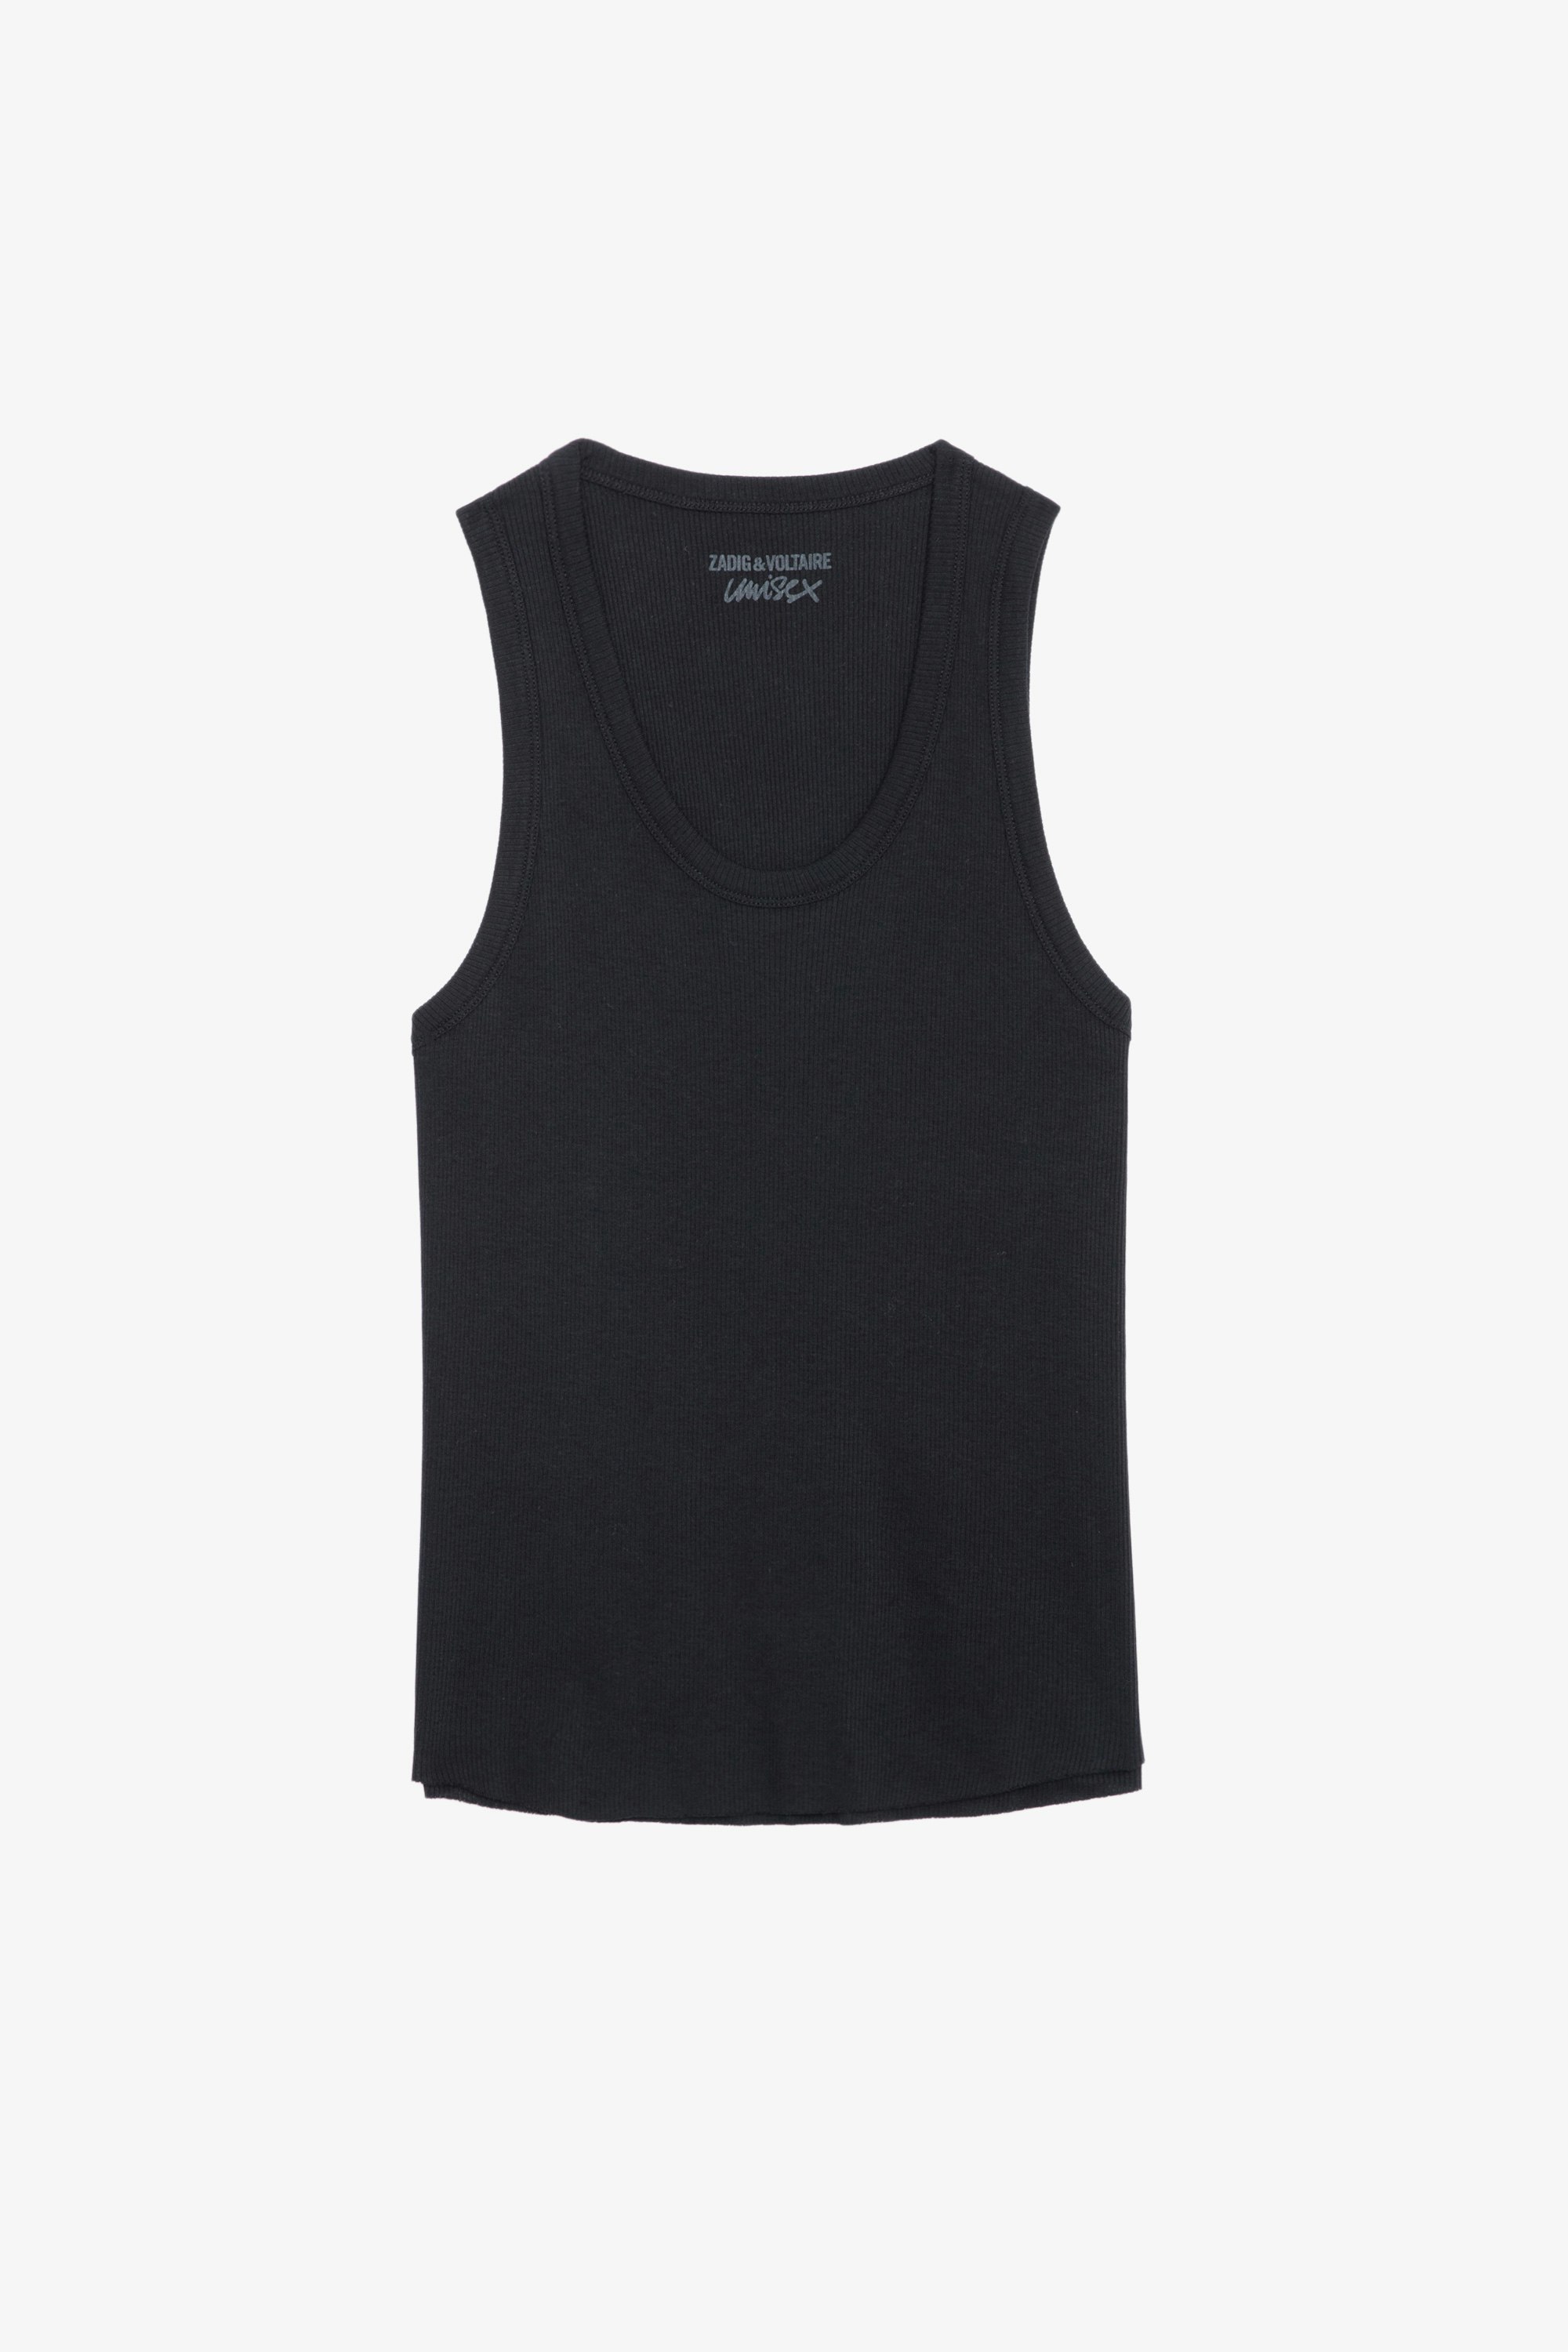 Camille Tank Top - Black ribbed cotton round-neck tank top with cutaway shoulders.